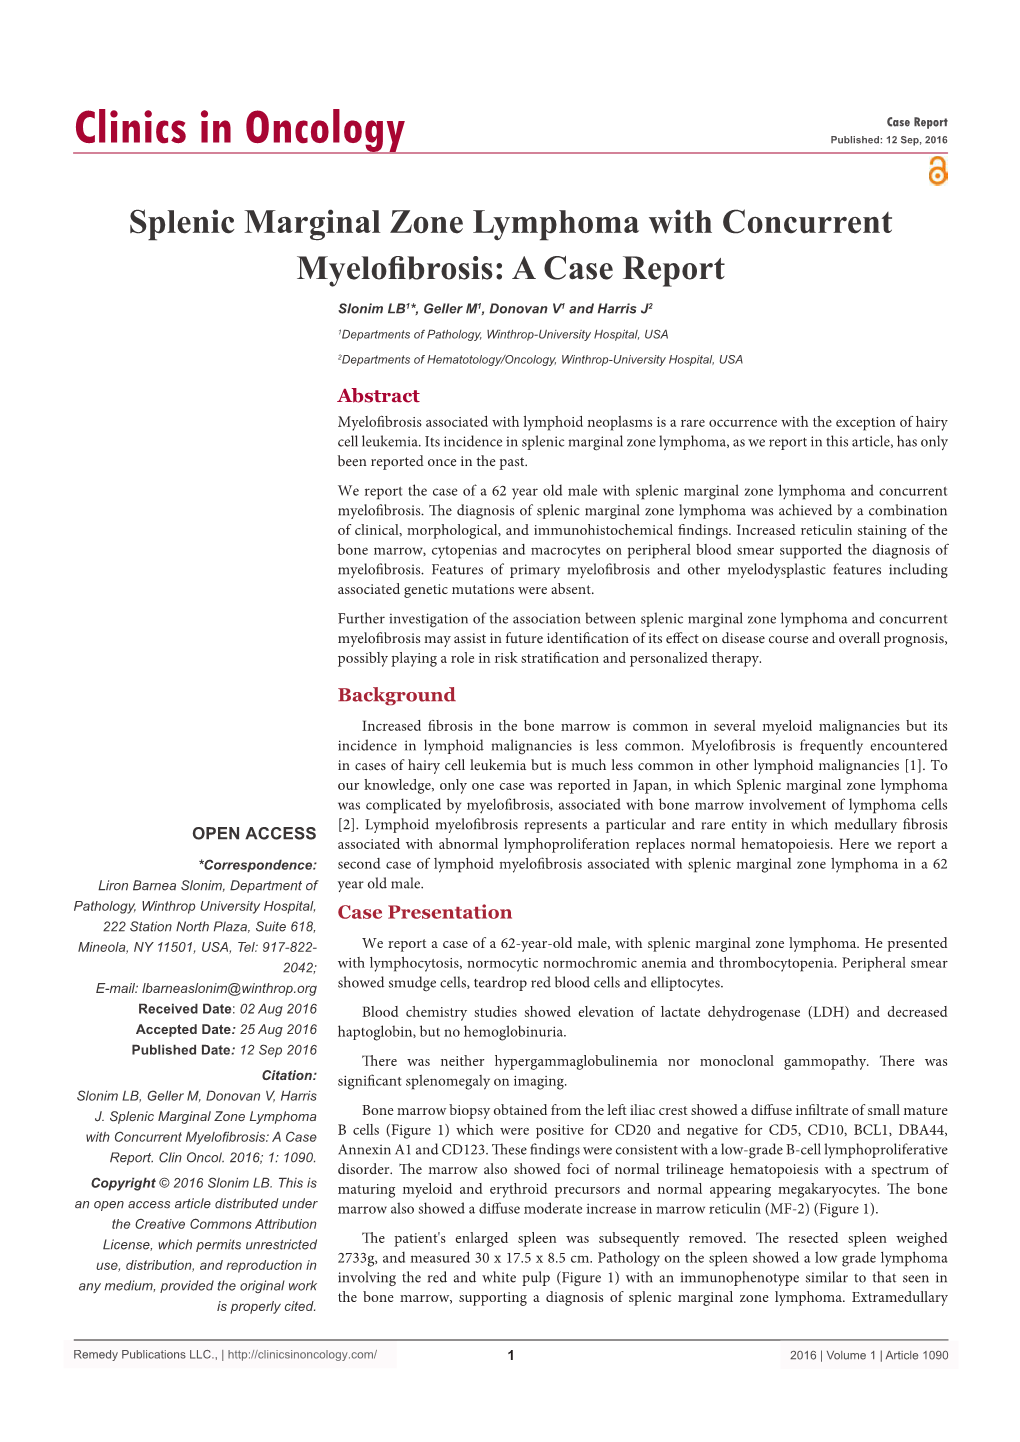 Splenic Marginal Zone Lymphoma with Concurrent Myelofibrosis: a Case Report